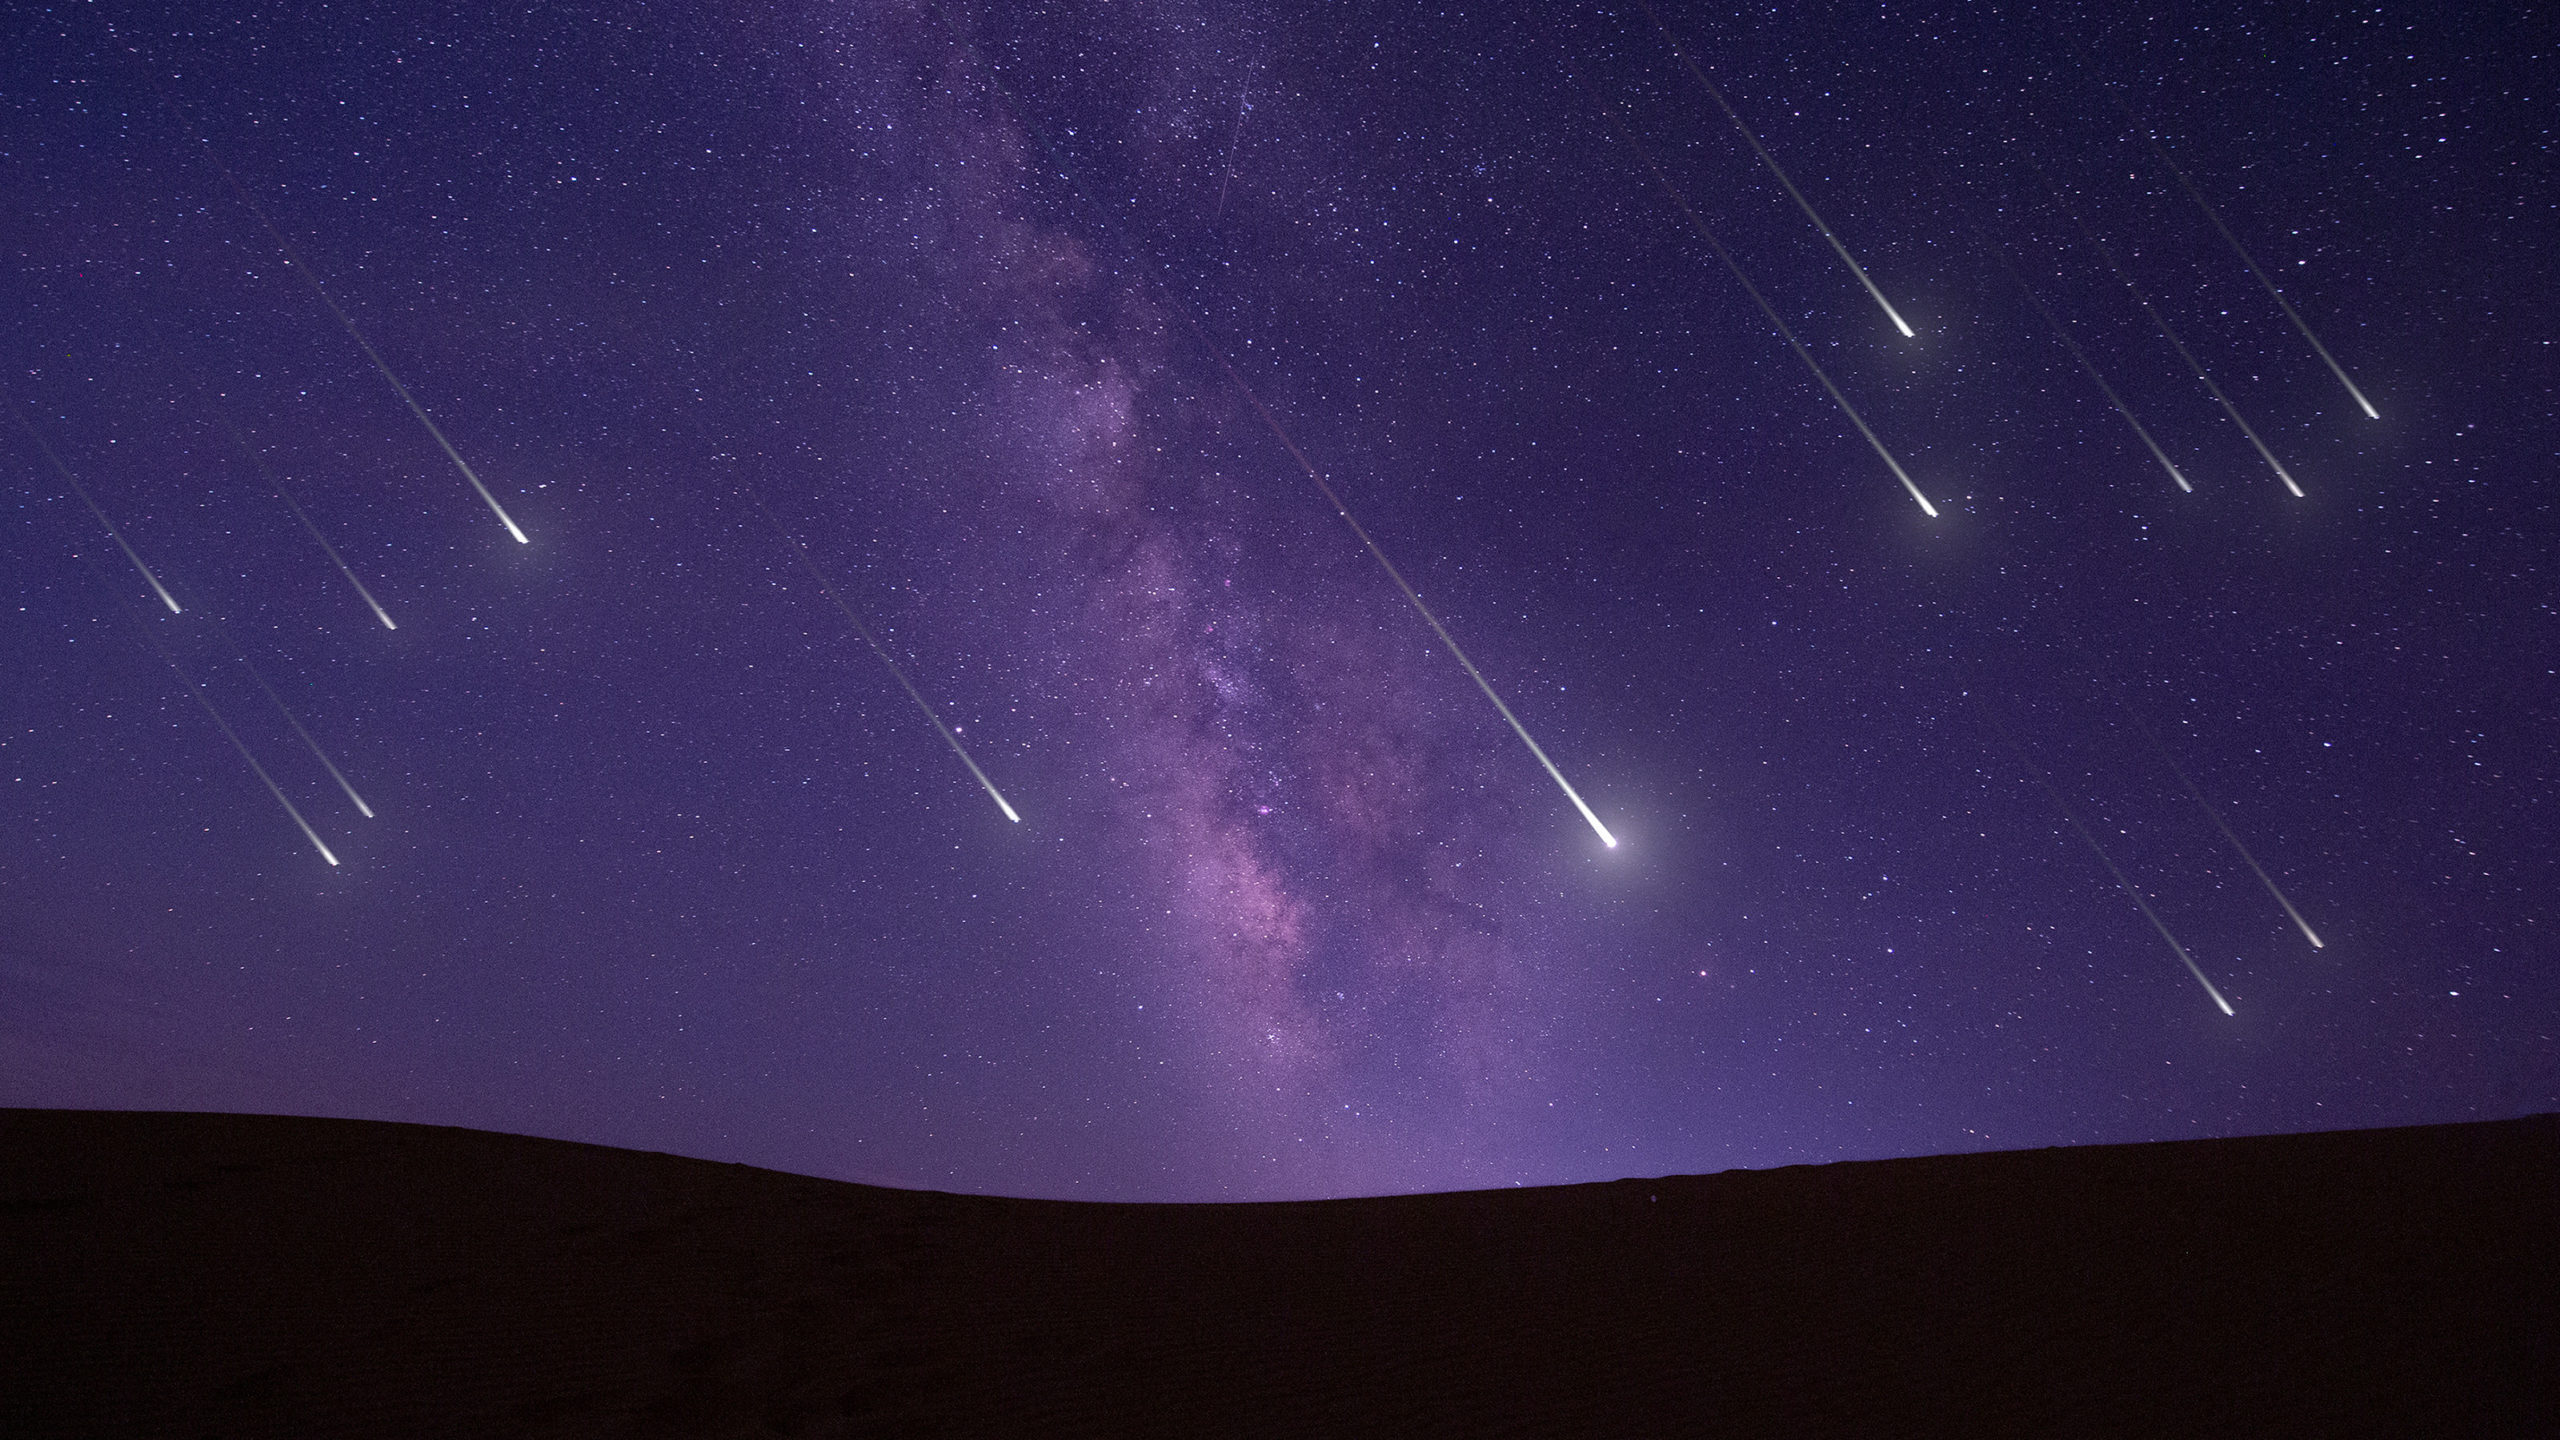 When to See the Lyrid Meteor Shower Light Up the Night Sky